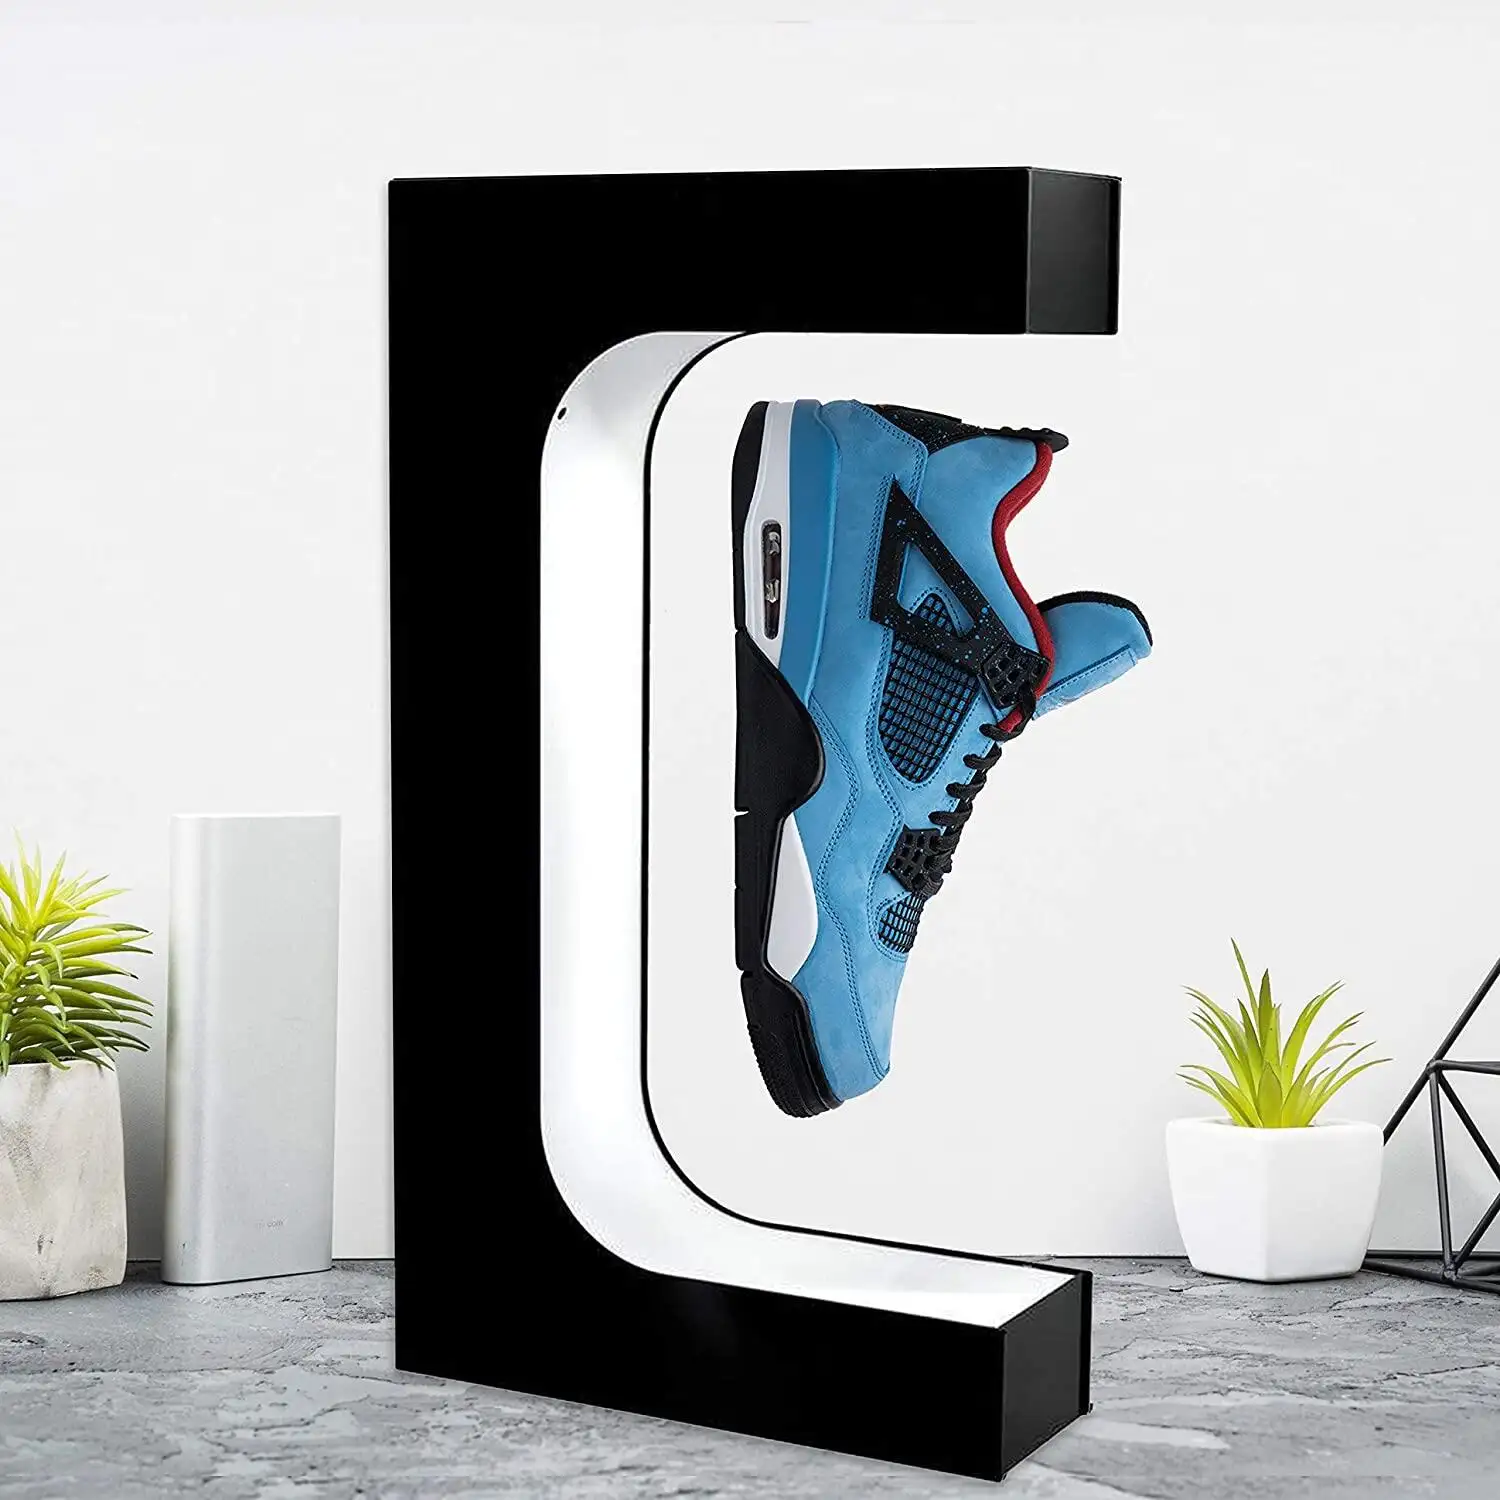 LED Magnetic Levitation Floating Shoe Display Levitating Rotating Shoes for Sneaker Collectors Home Decoration